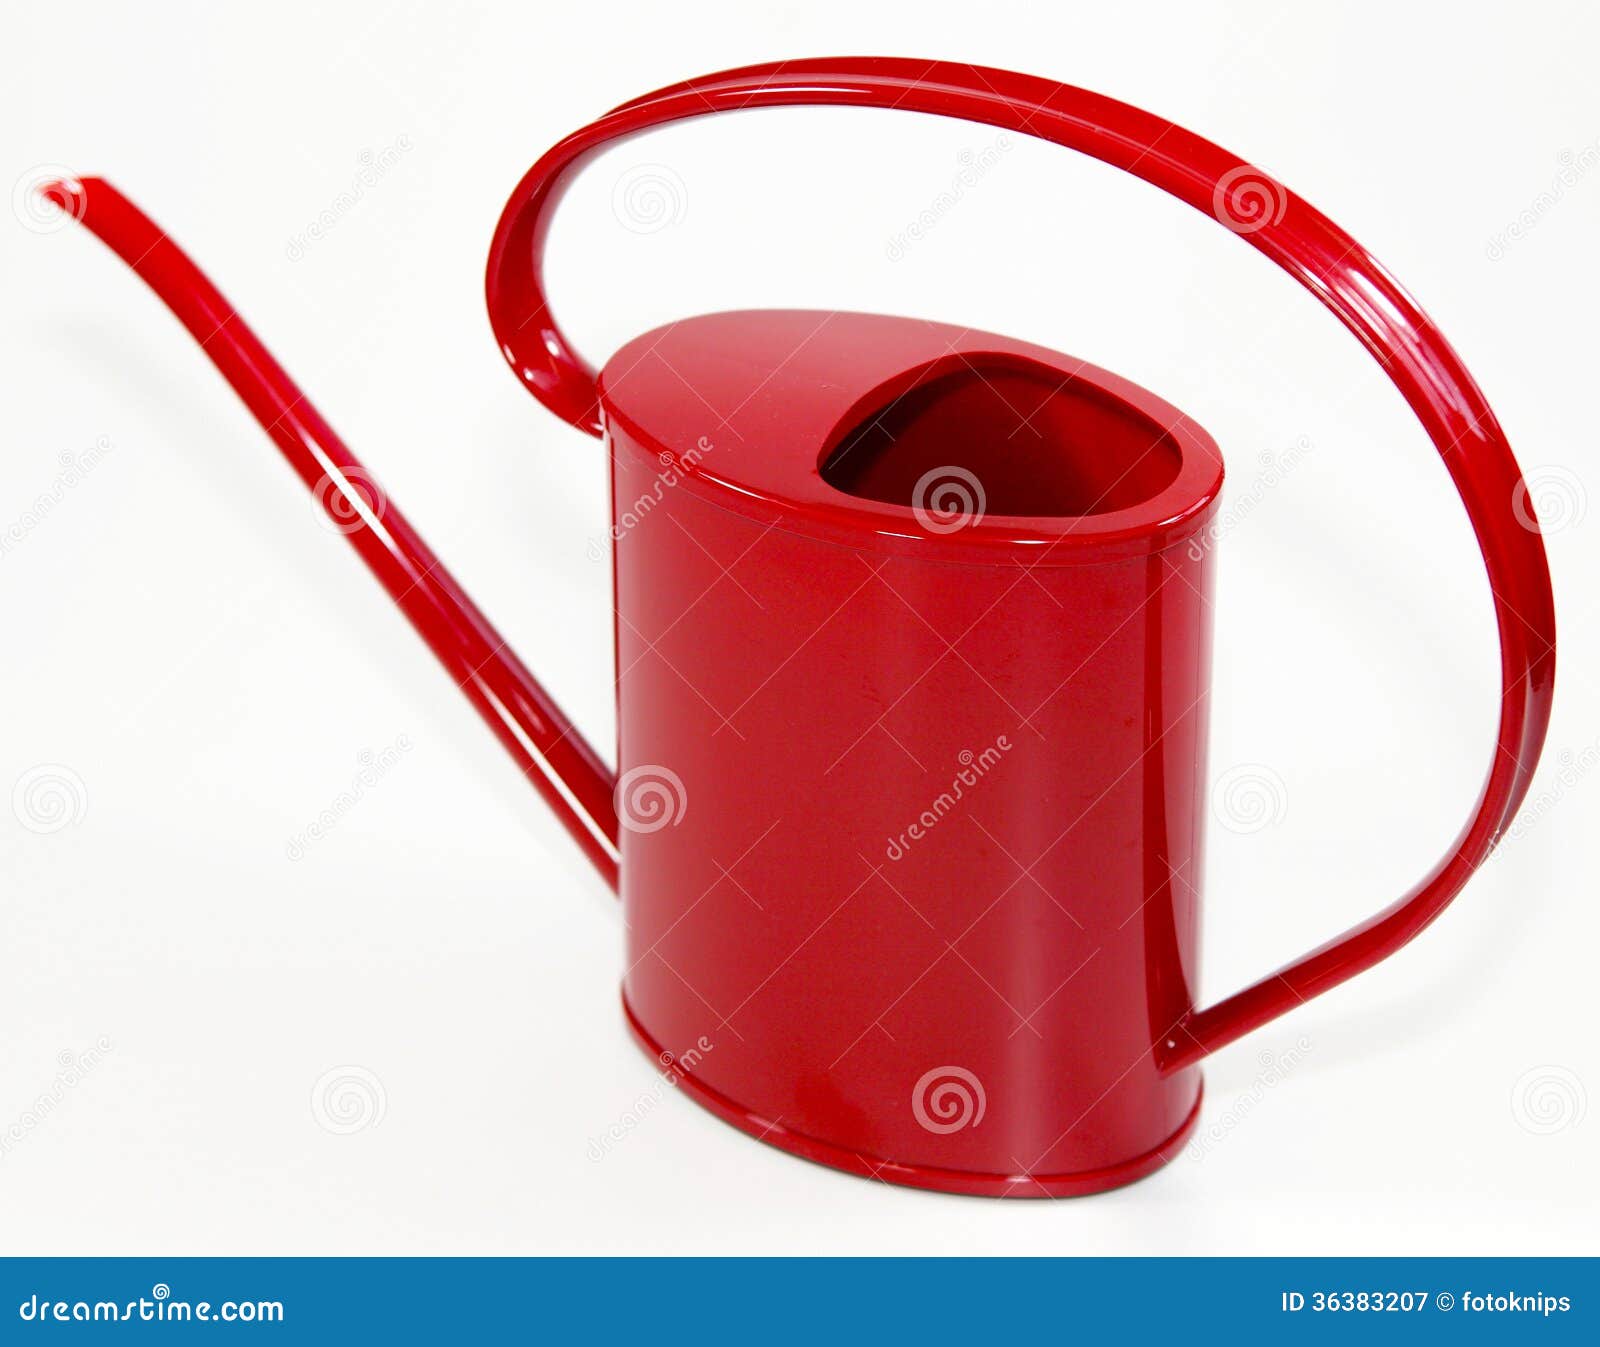 Red watering can stock image. Image of house, watering - 36383207